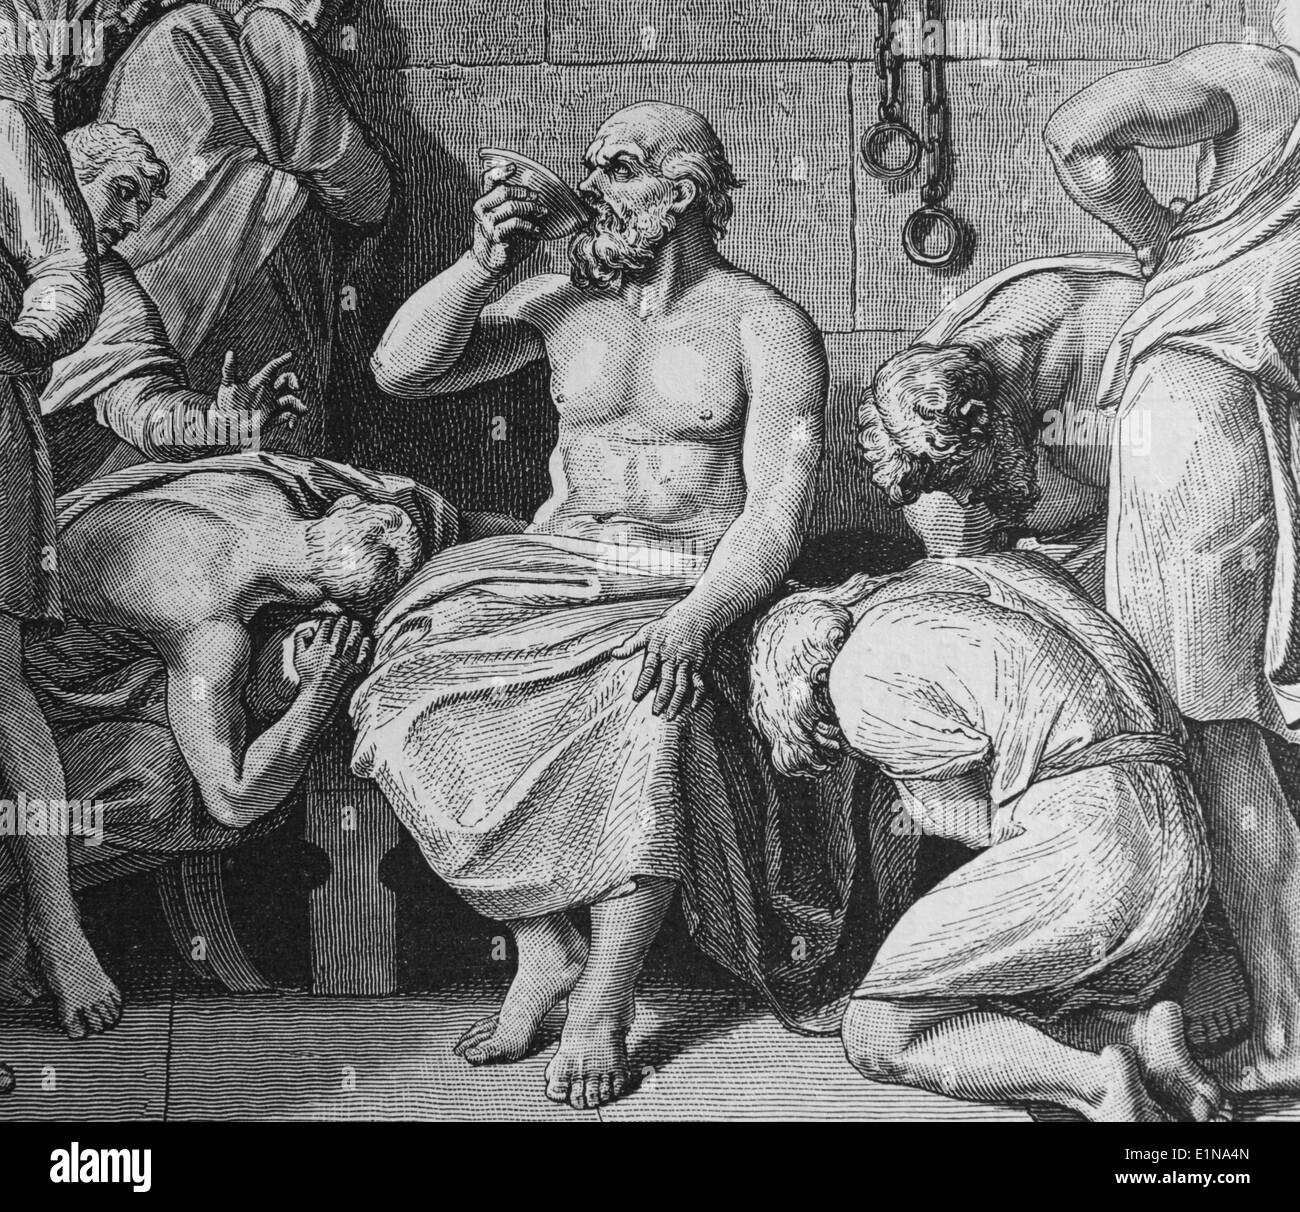 Death of Socrates (469 BC-399 BC) by drinking poison. Classical Greek philosopher. Engraving, 1880. Greece and Rome. Stock Photo